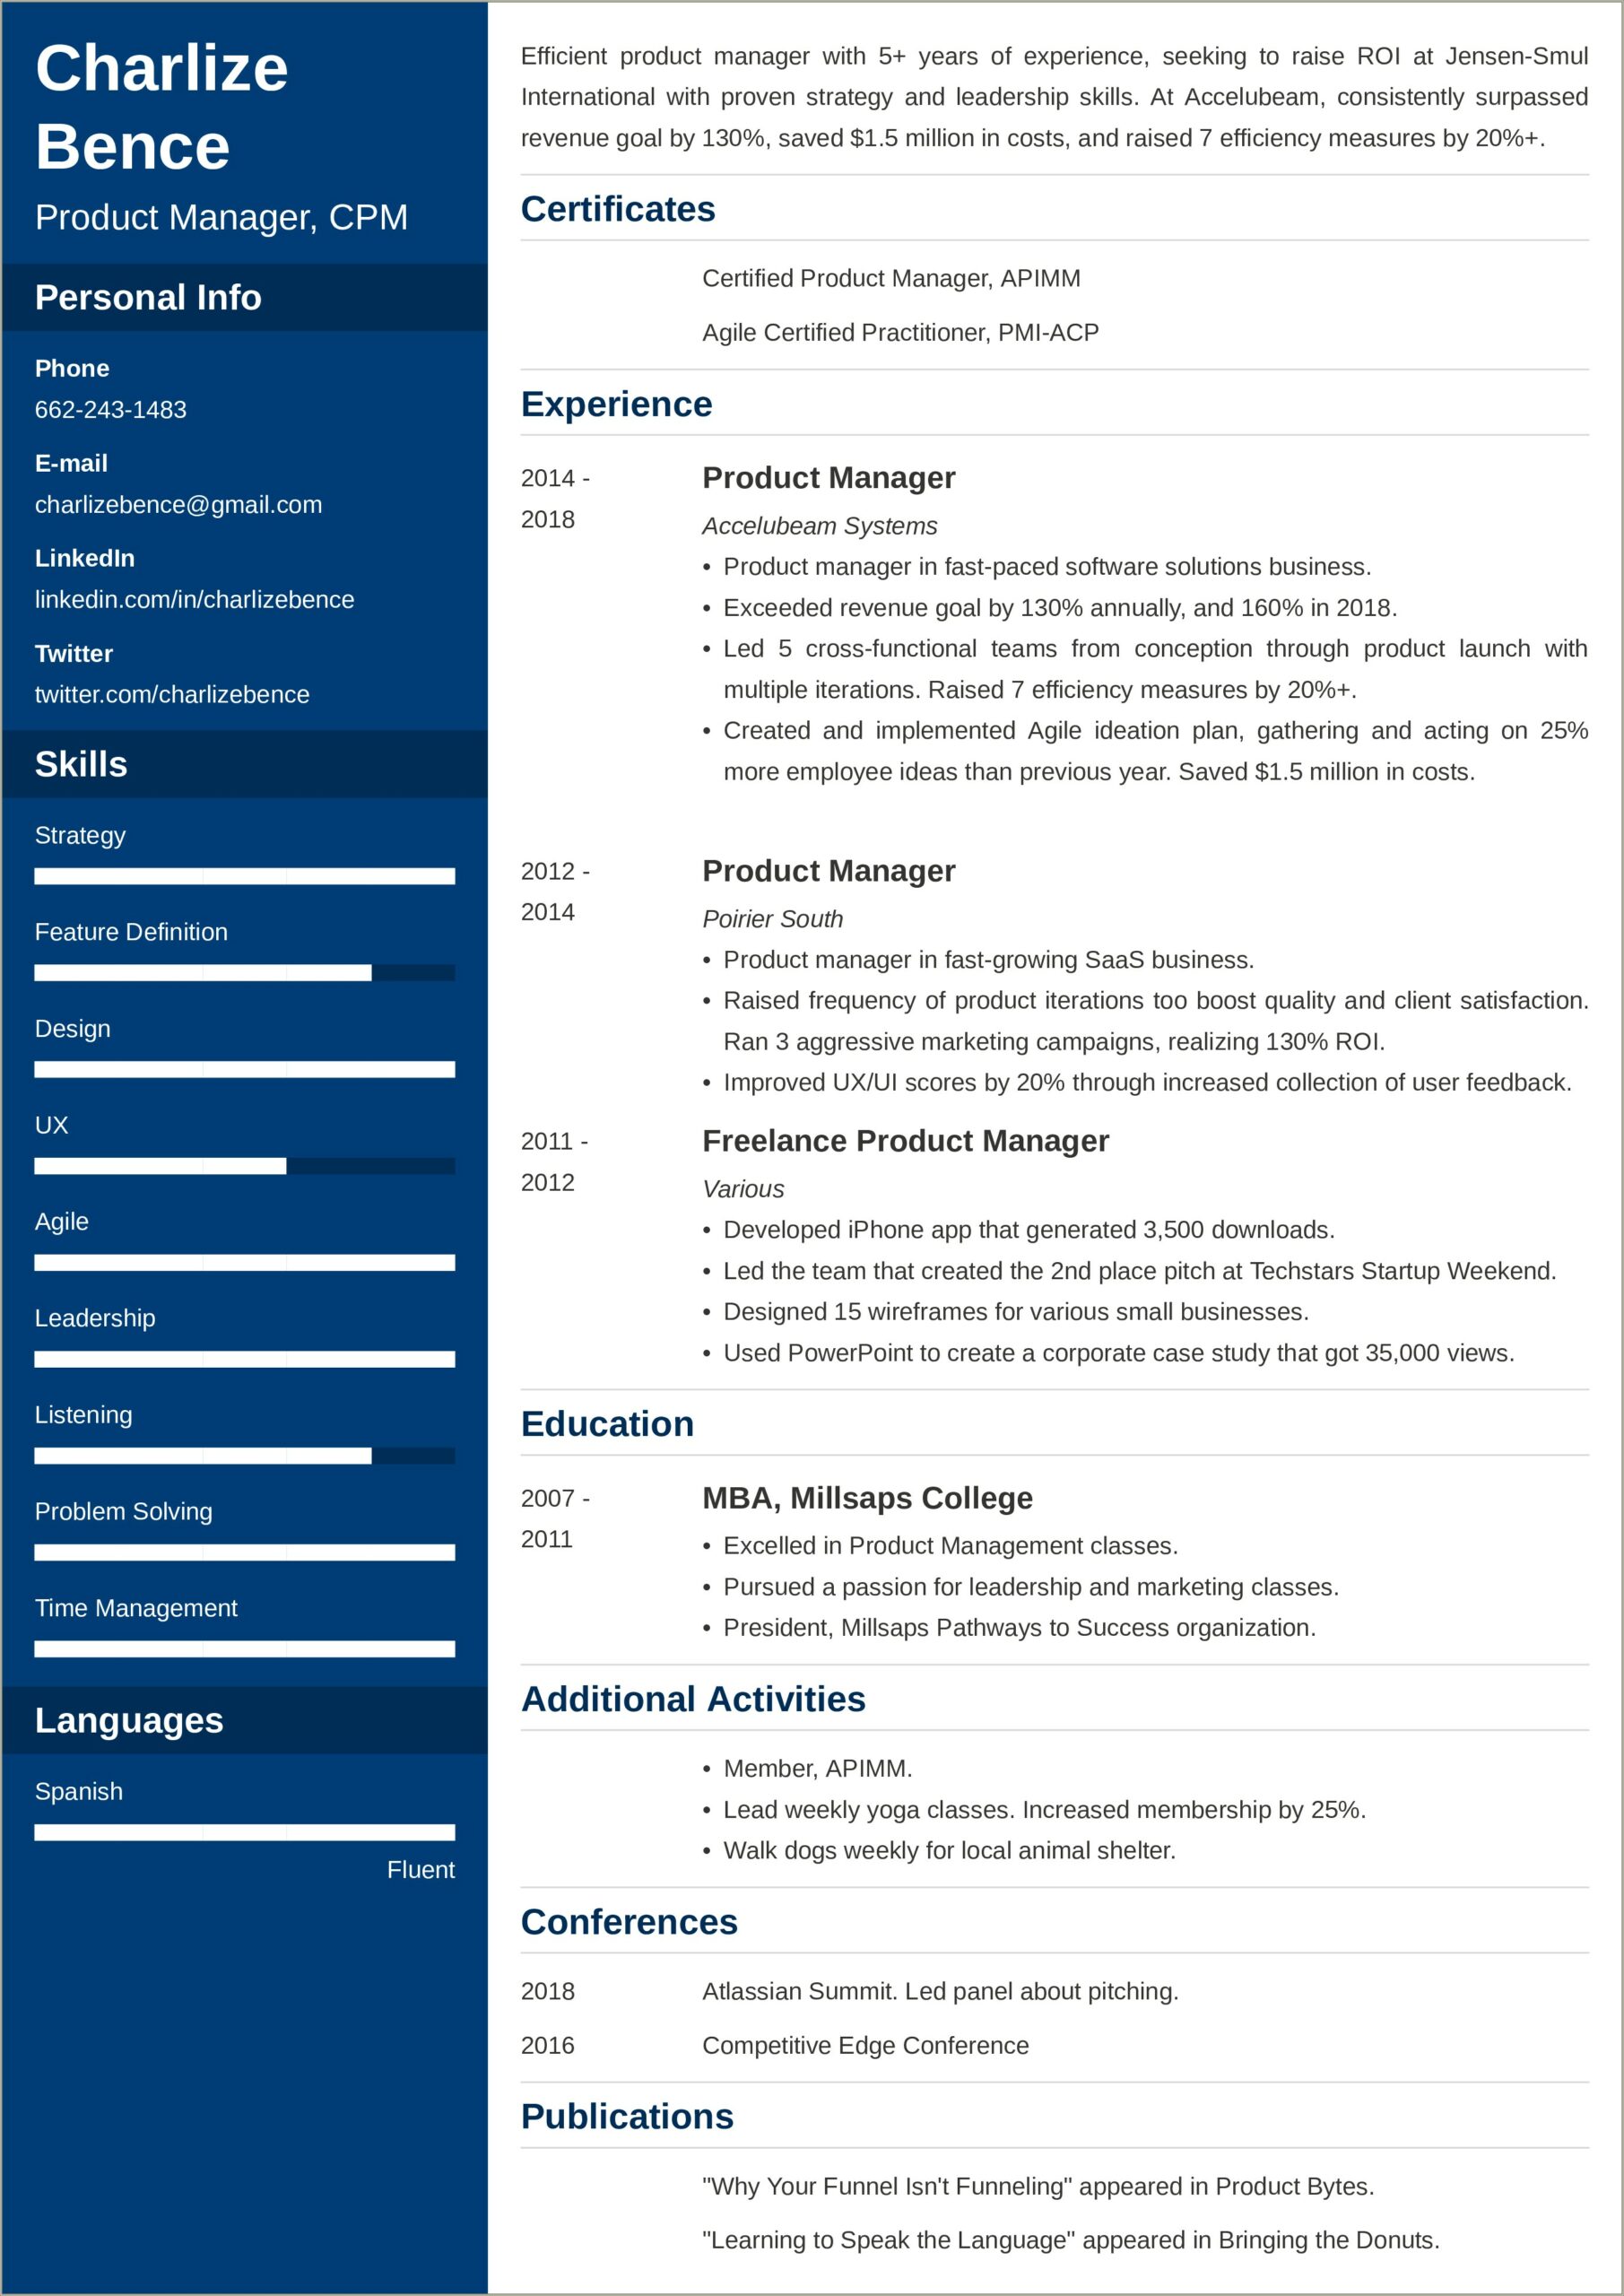 Proposition Statement For Business Manager Resume